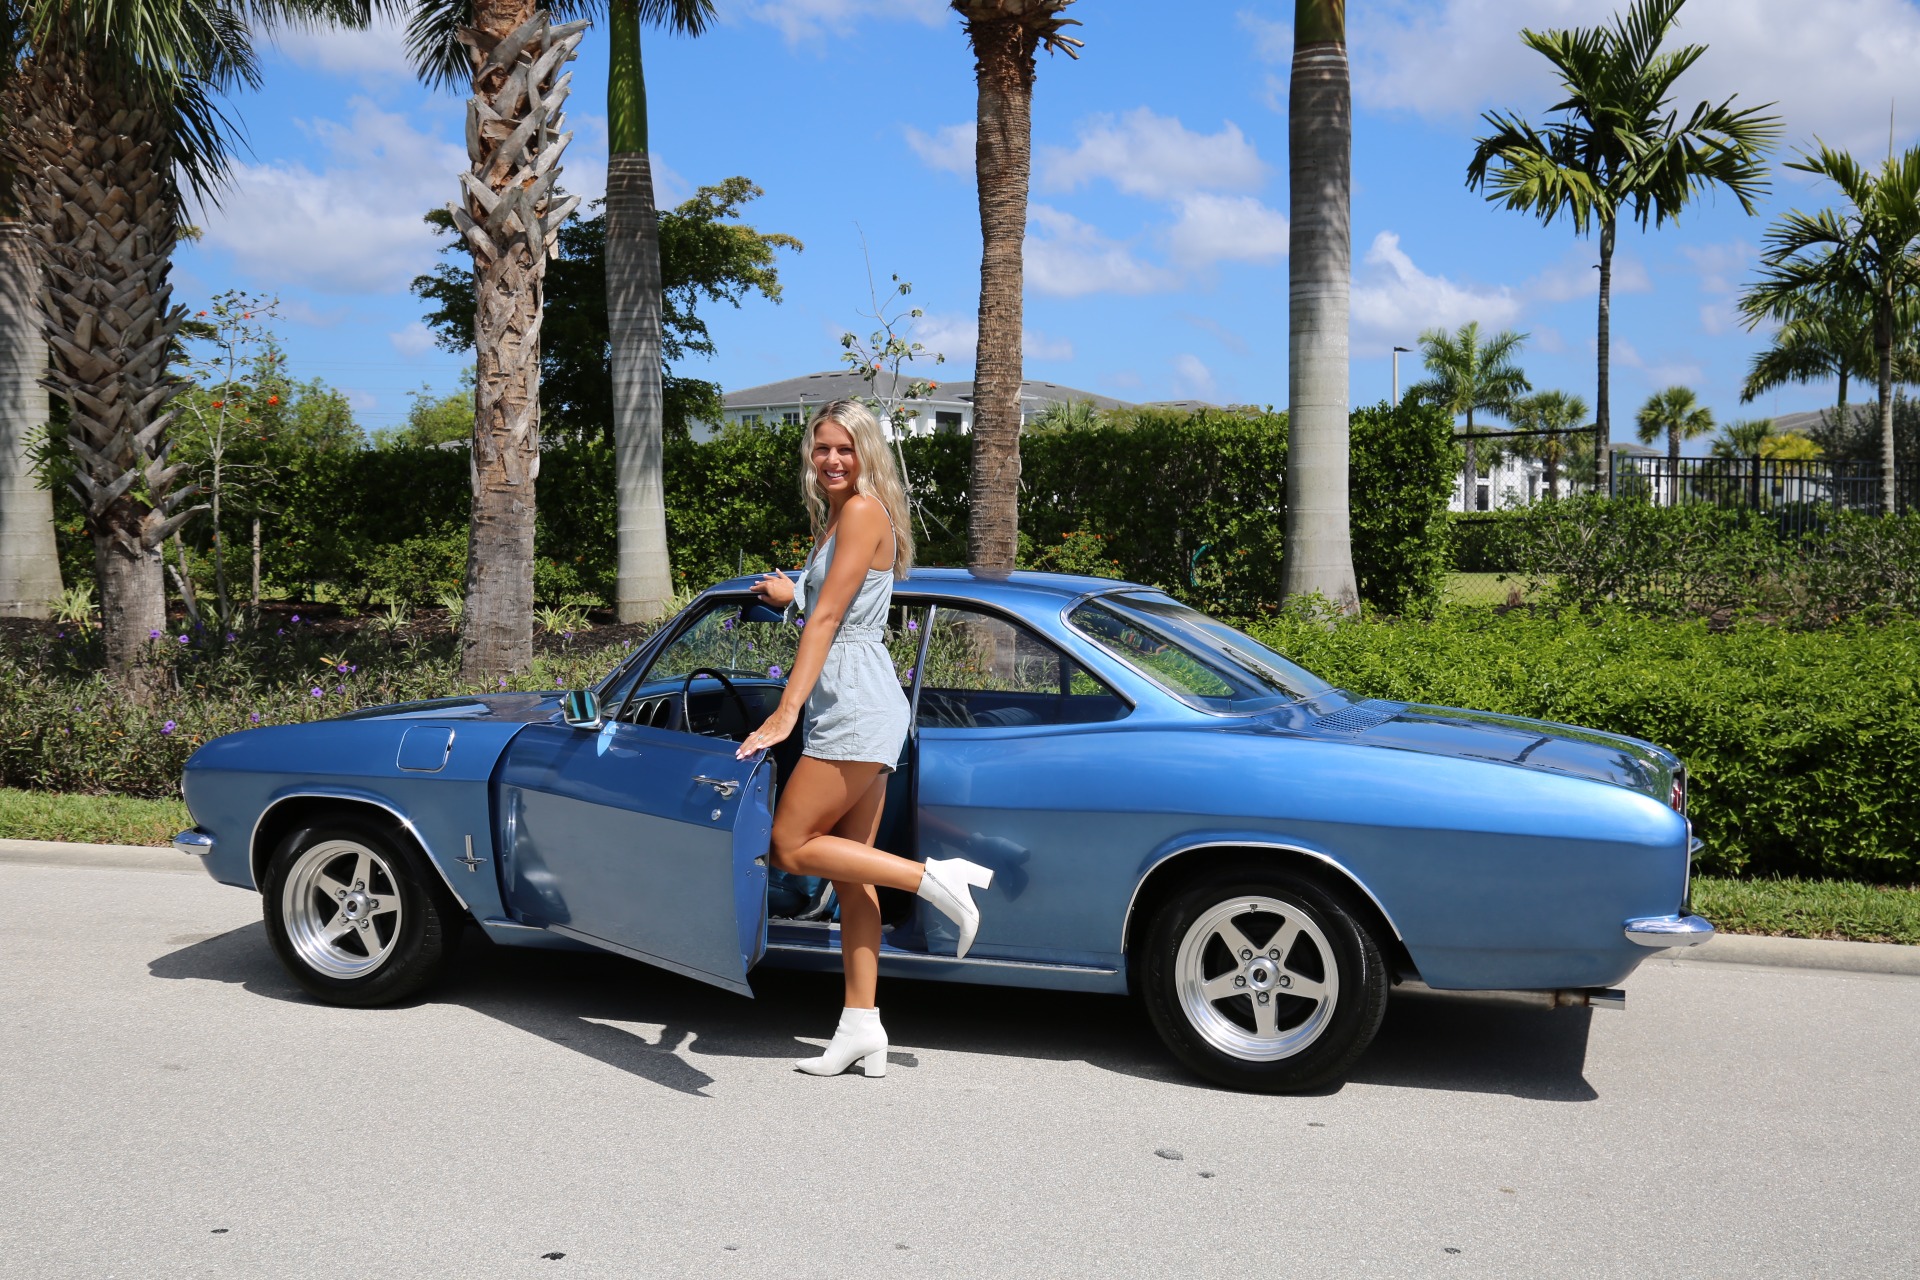 Used 1965 Chevrolet Corvair Corvair Monza for sale Sold at Muscle Cars for Sale Inc. in Fort Myers FL 33912 2